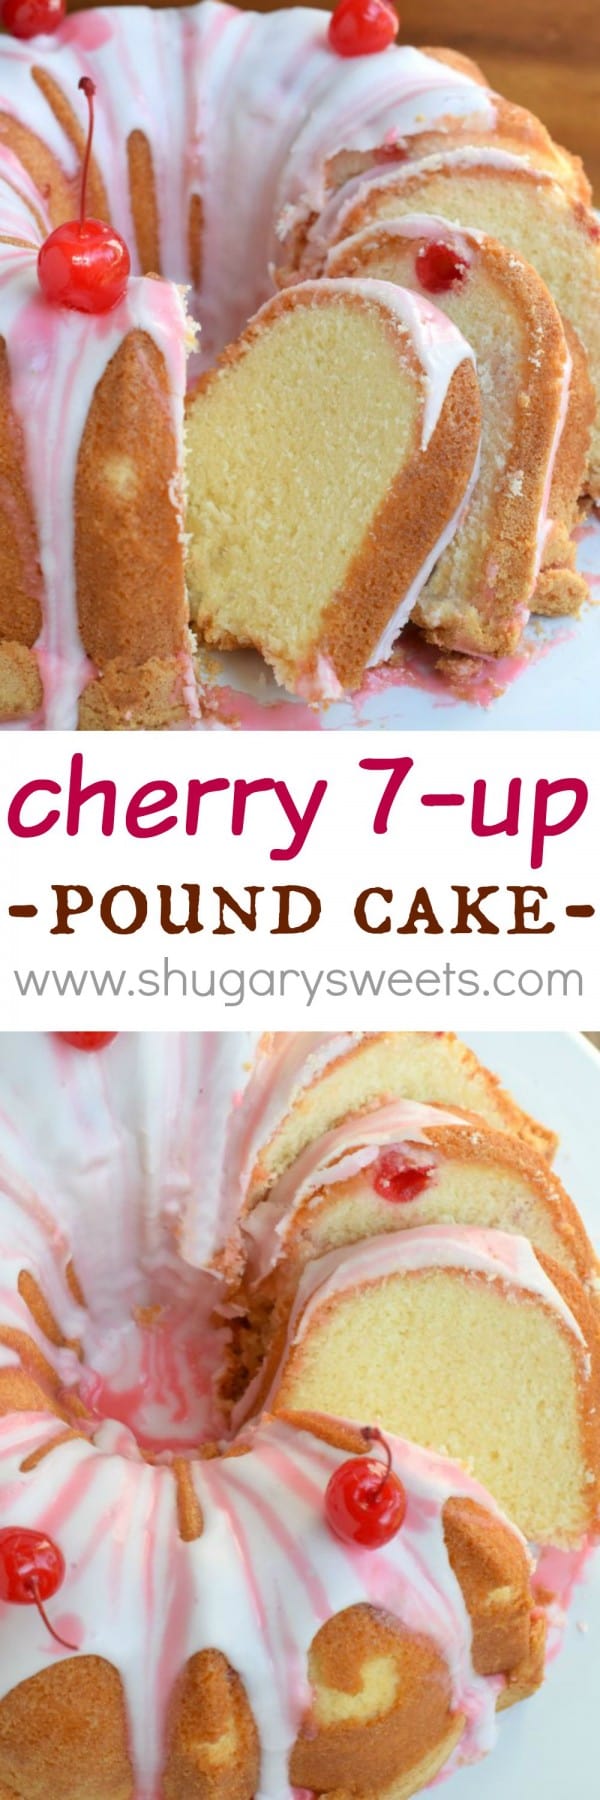 Cherry 7 Up Pound Cake is a classic, yet decadent treat. The crunchy crust with the sweet glaze makes this cake irresistible!